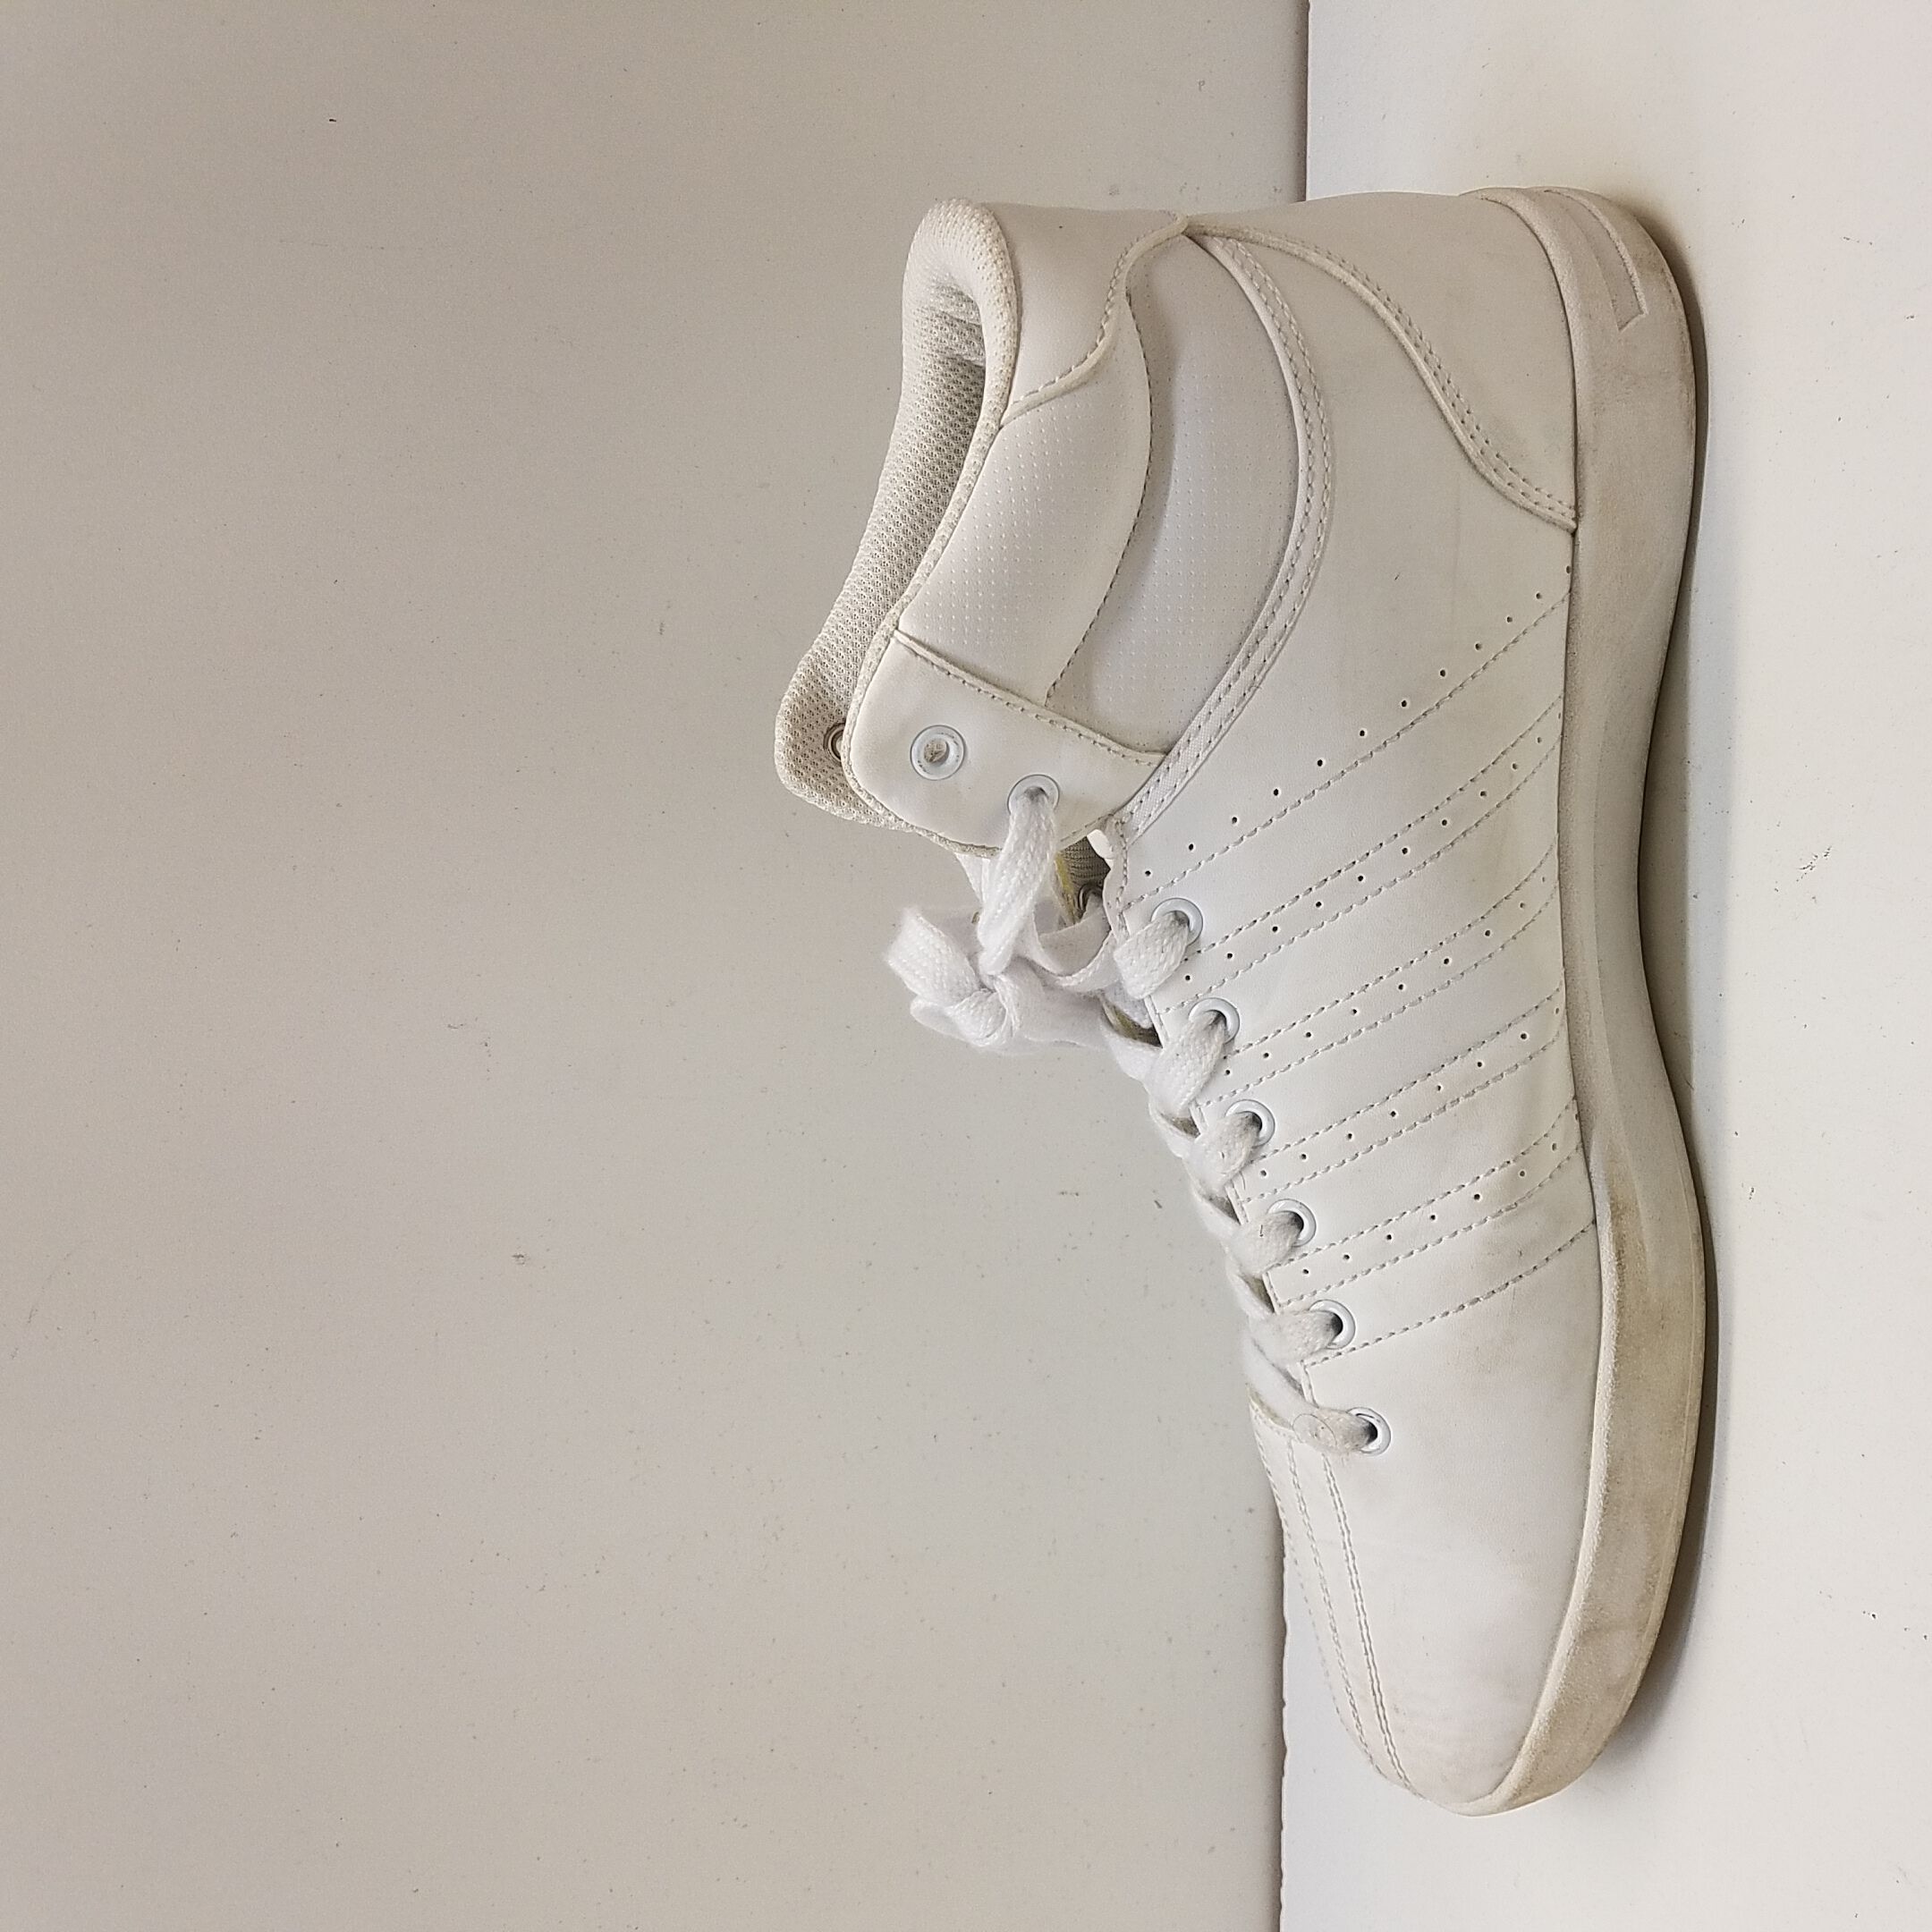 K-Swiss White High-Top Sneakers Men's US Size 11